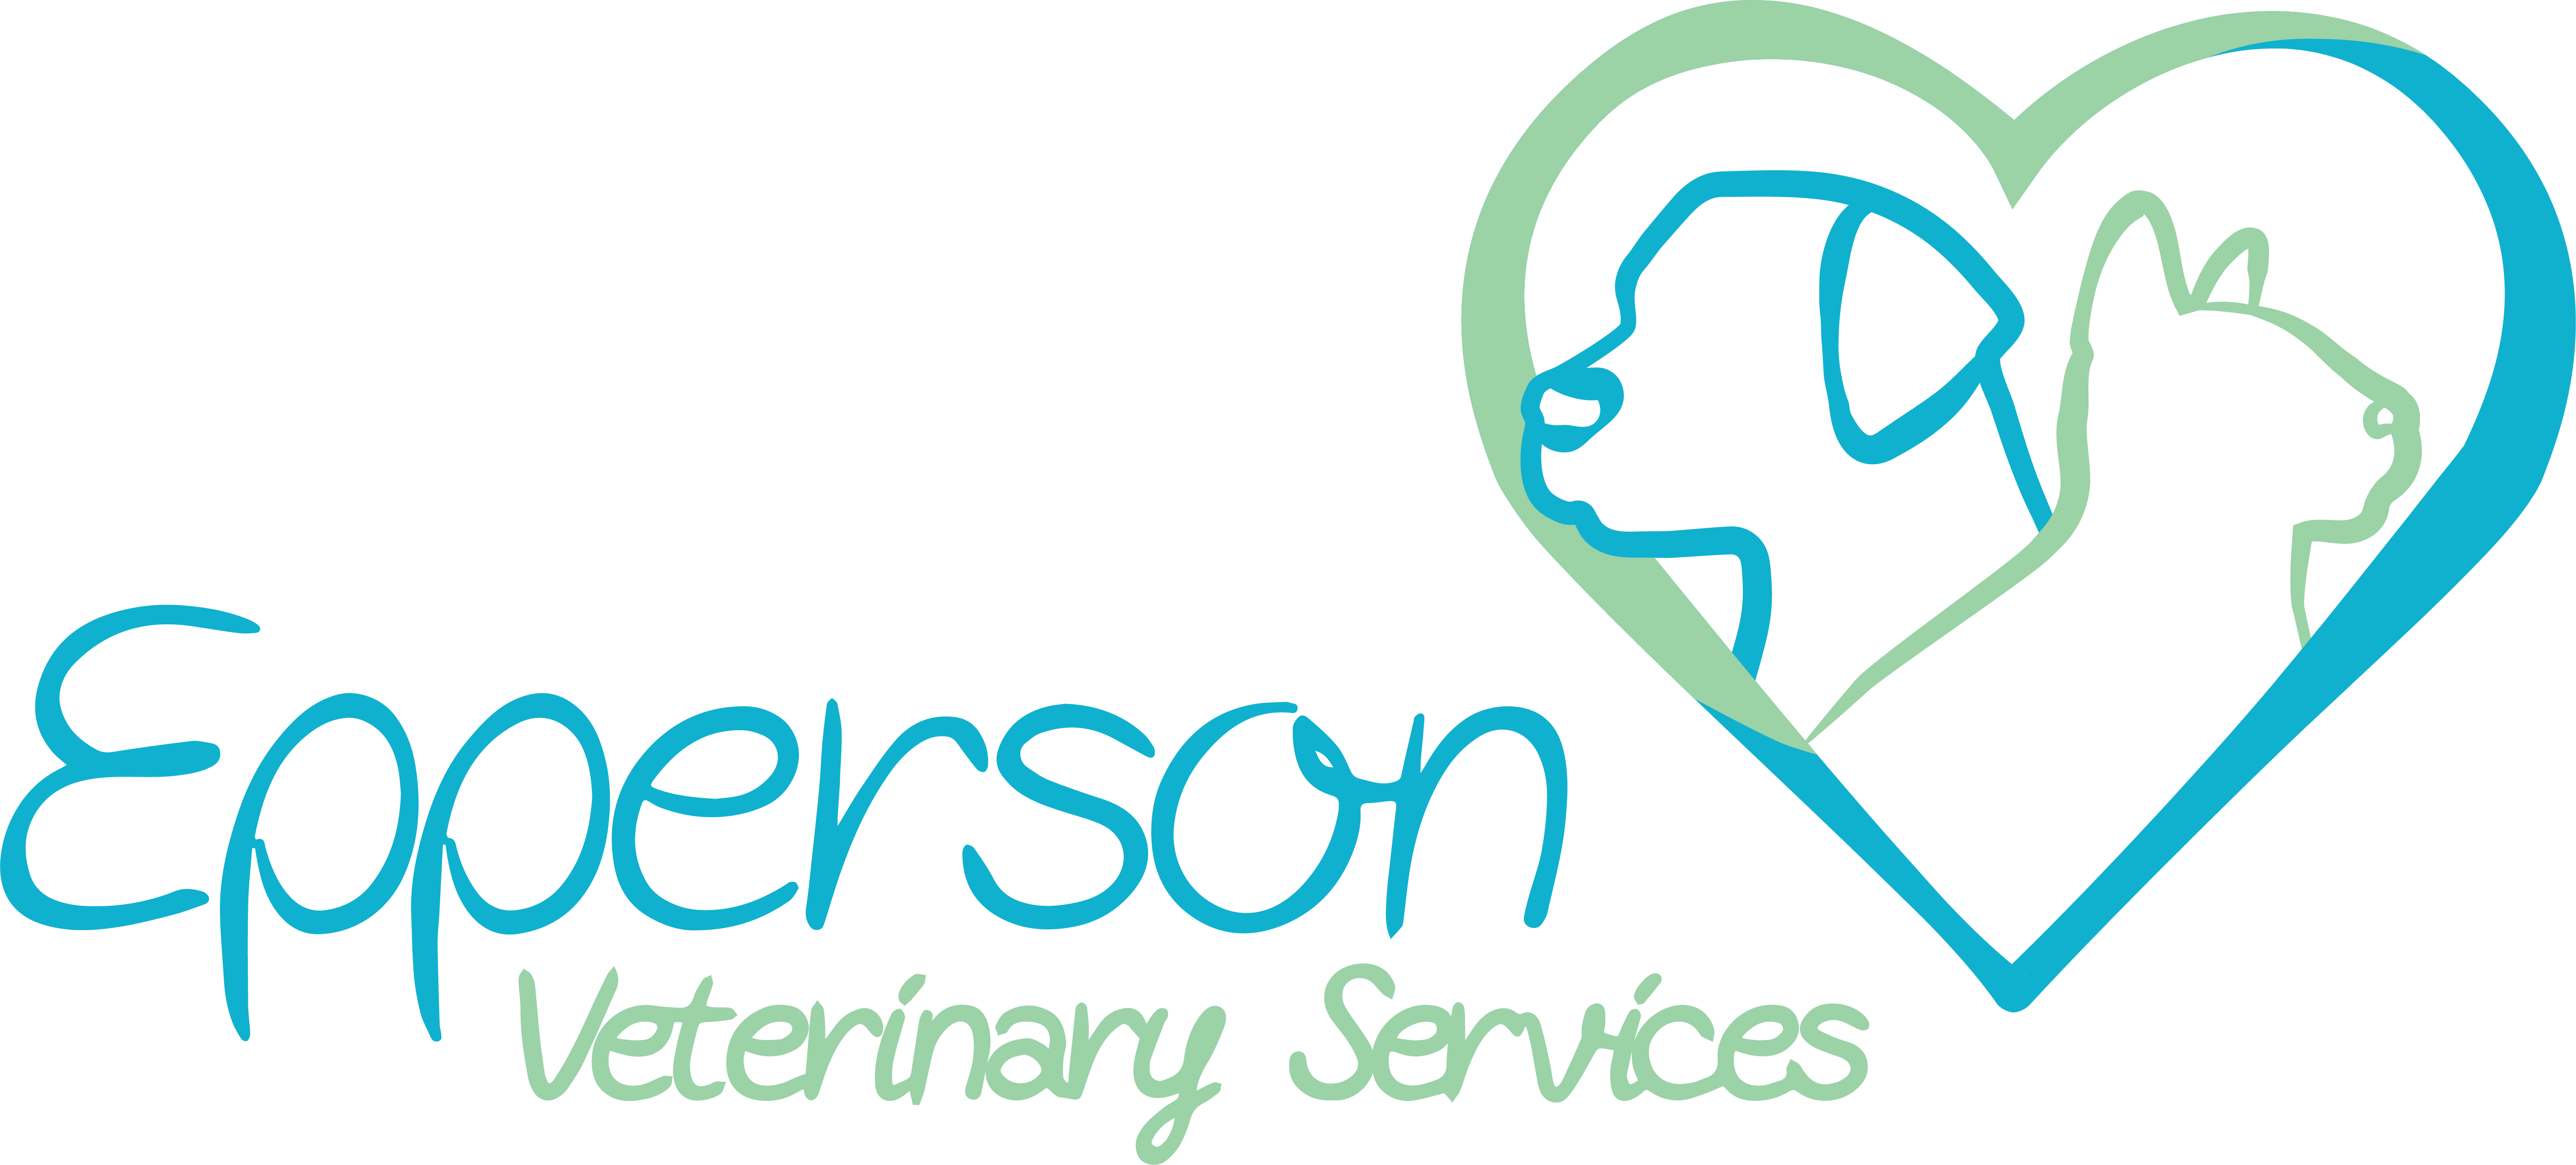 Epperson Veterinary Services